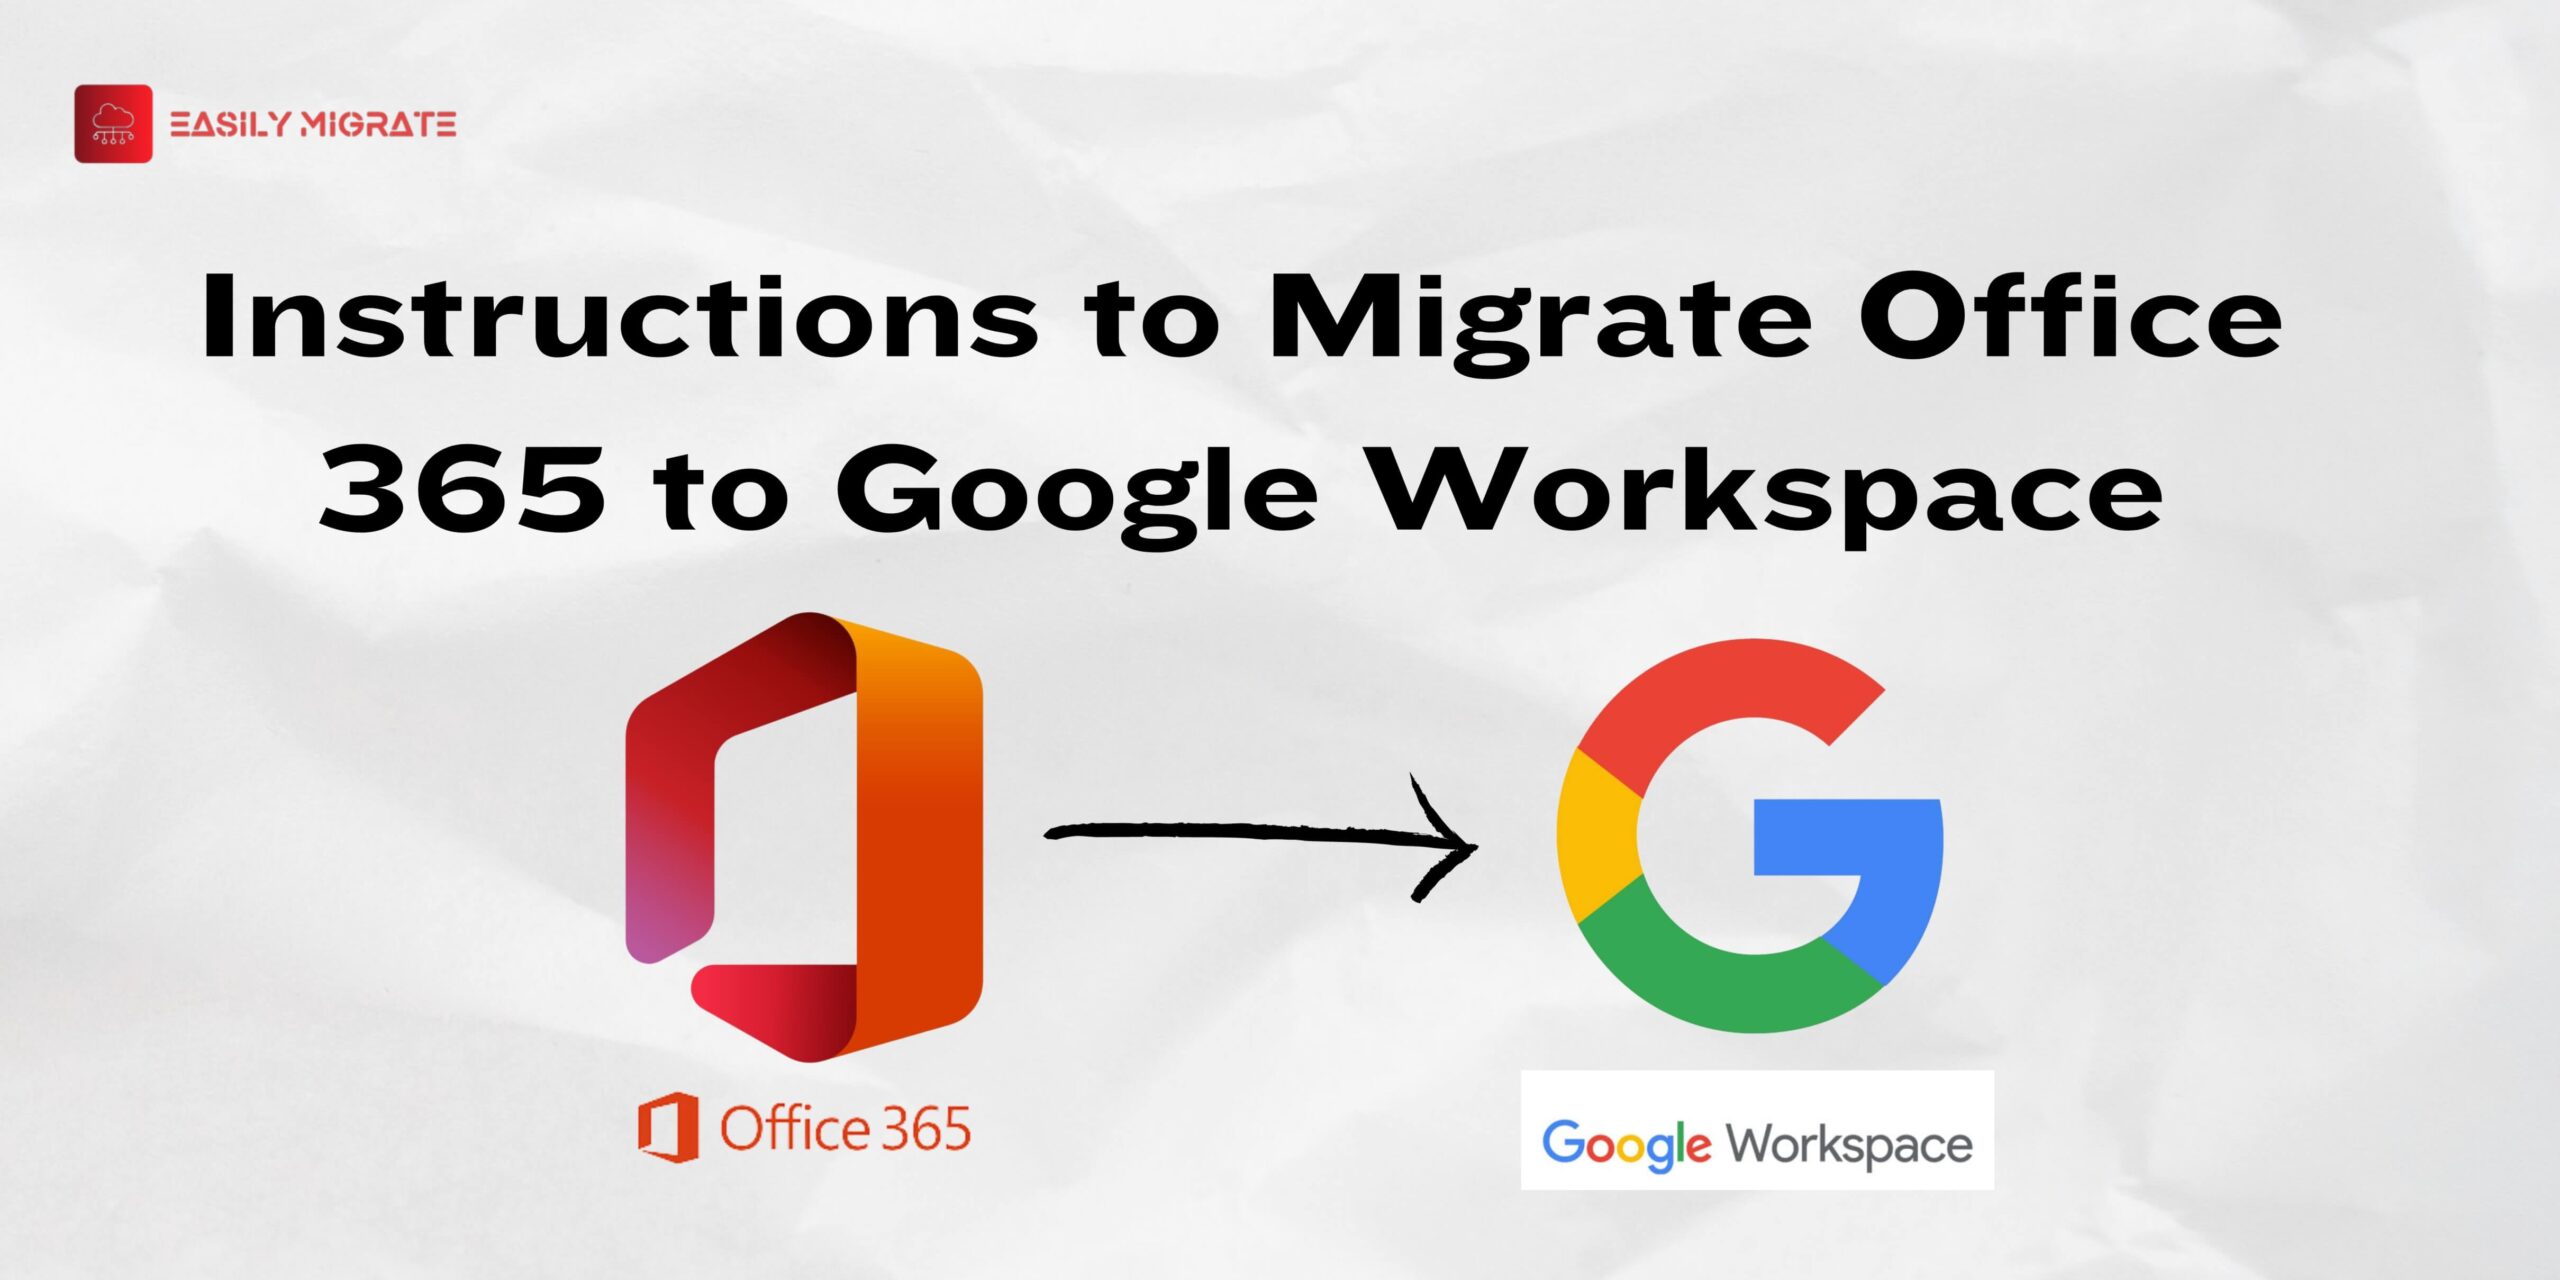 Instructions to Migrate Office 365 to Google Workspace